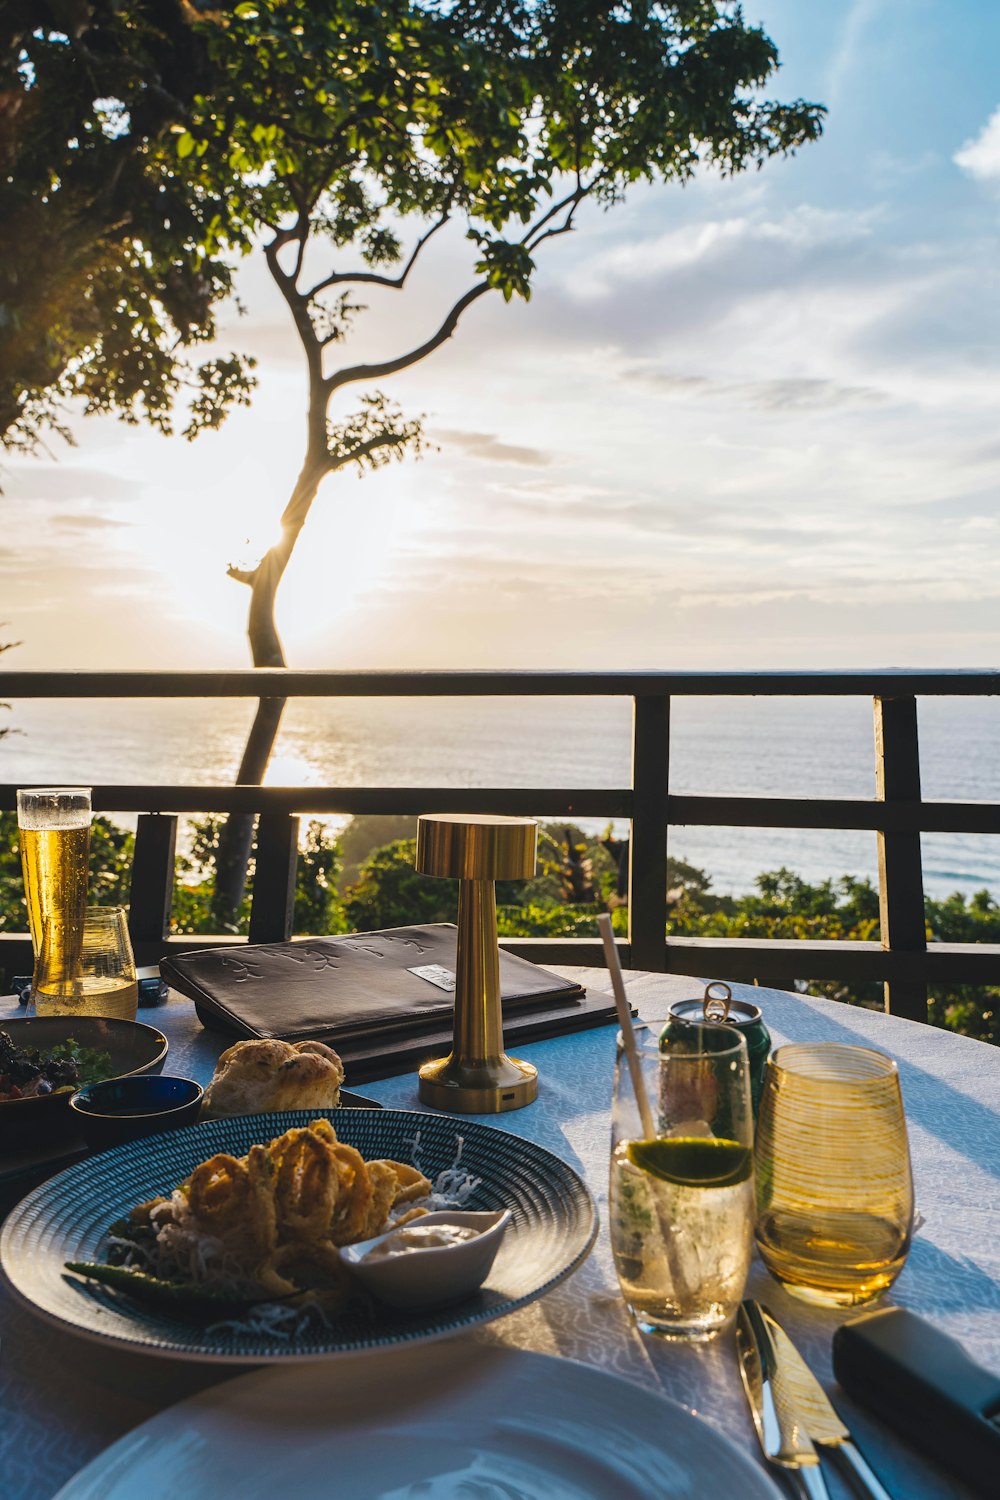 a plate of food on a table with a view of the ocean